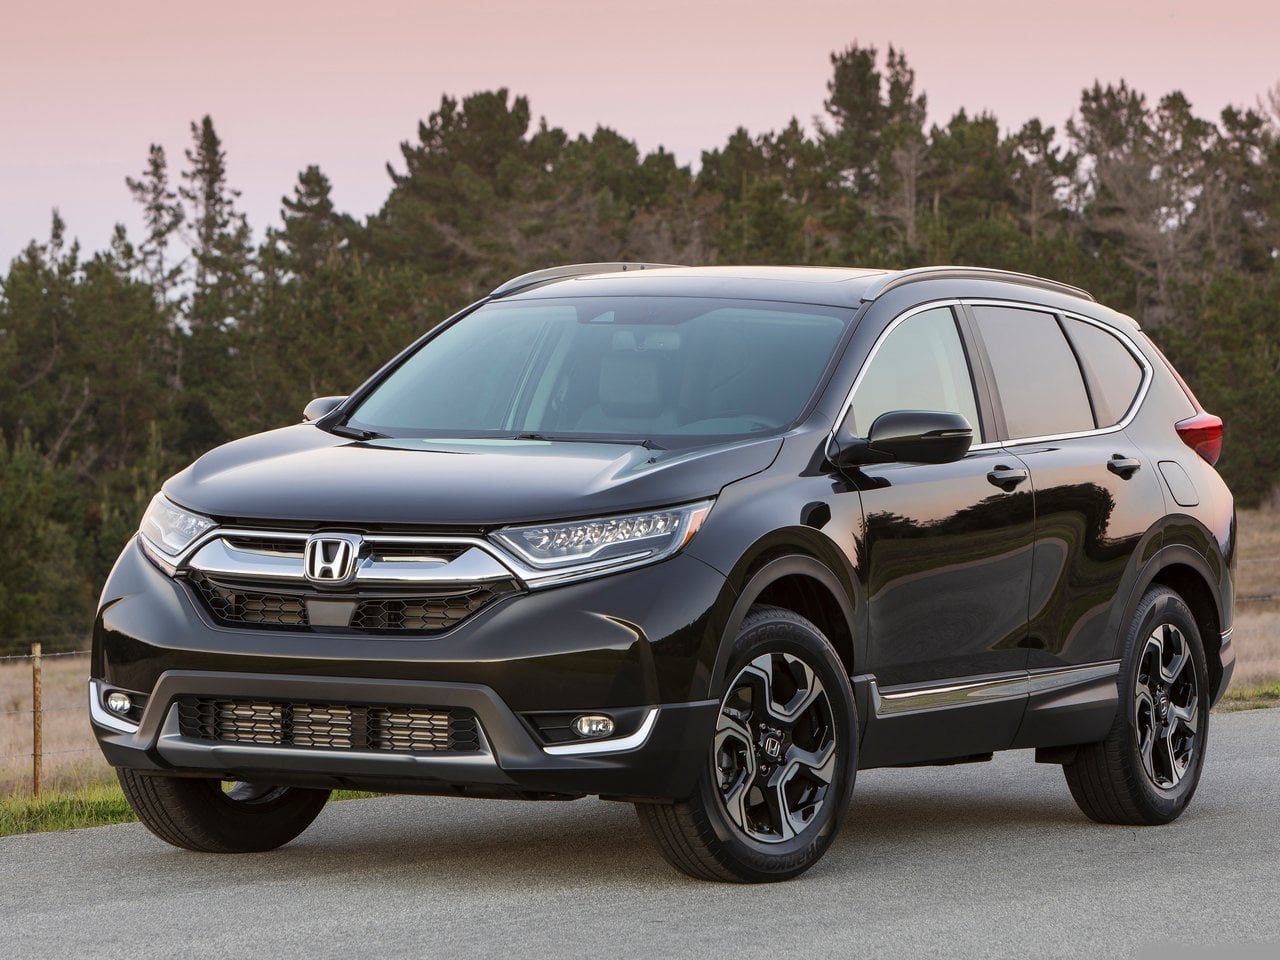 2018 Honda CRV 7 Seater Launch Date, Price in India, Specifications